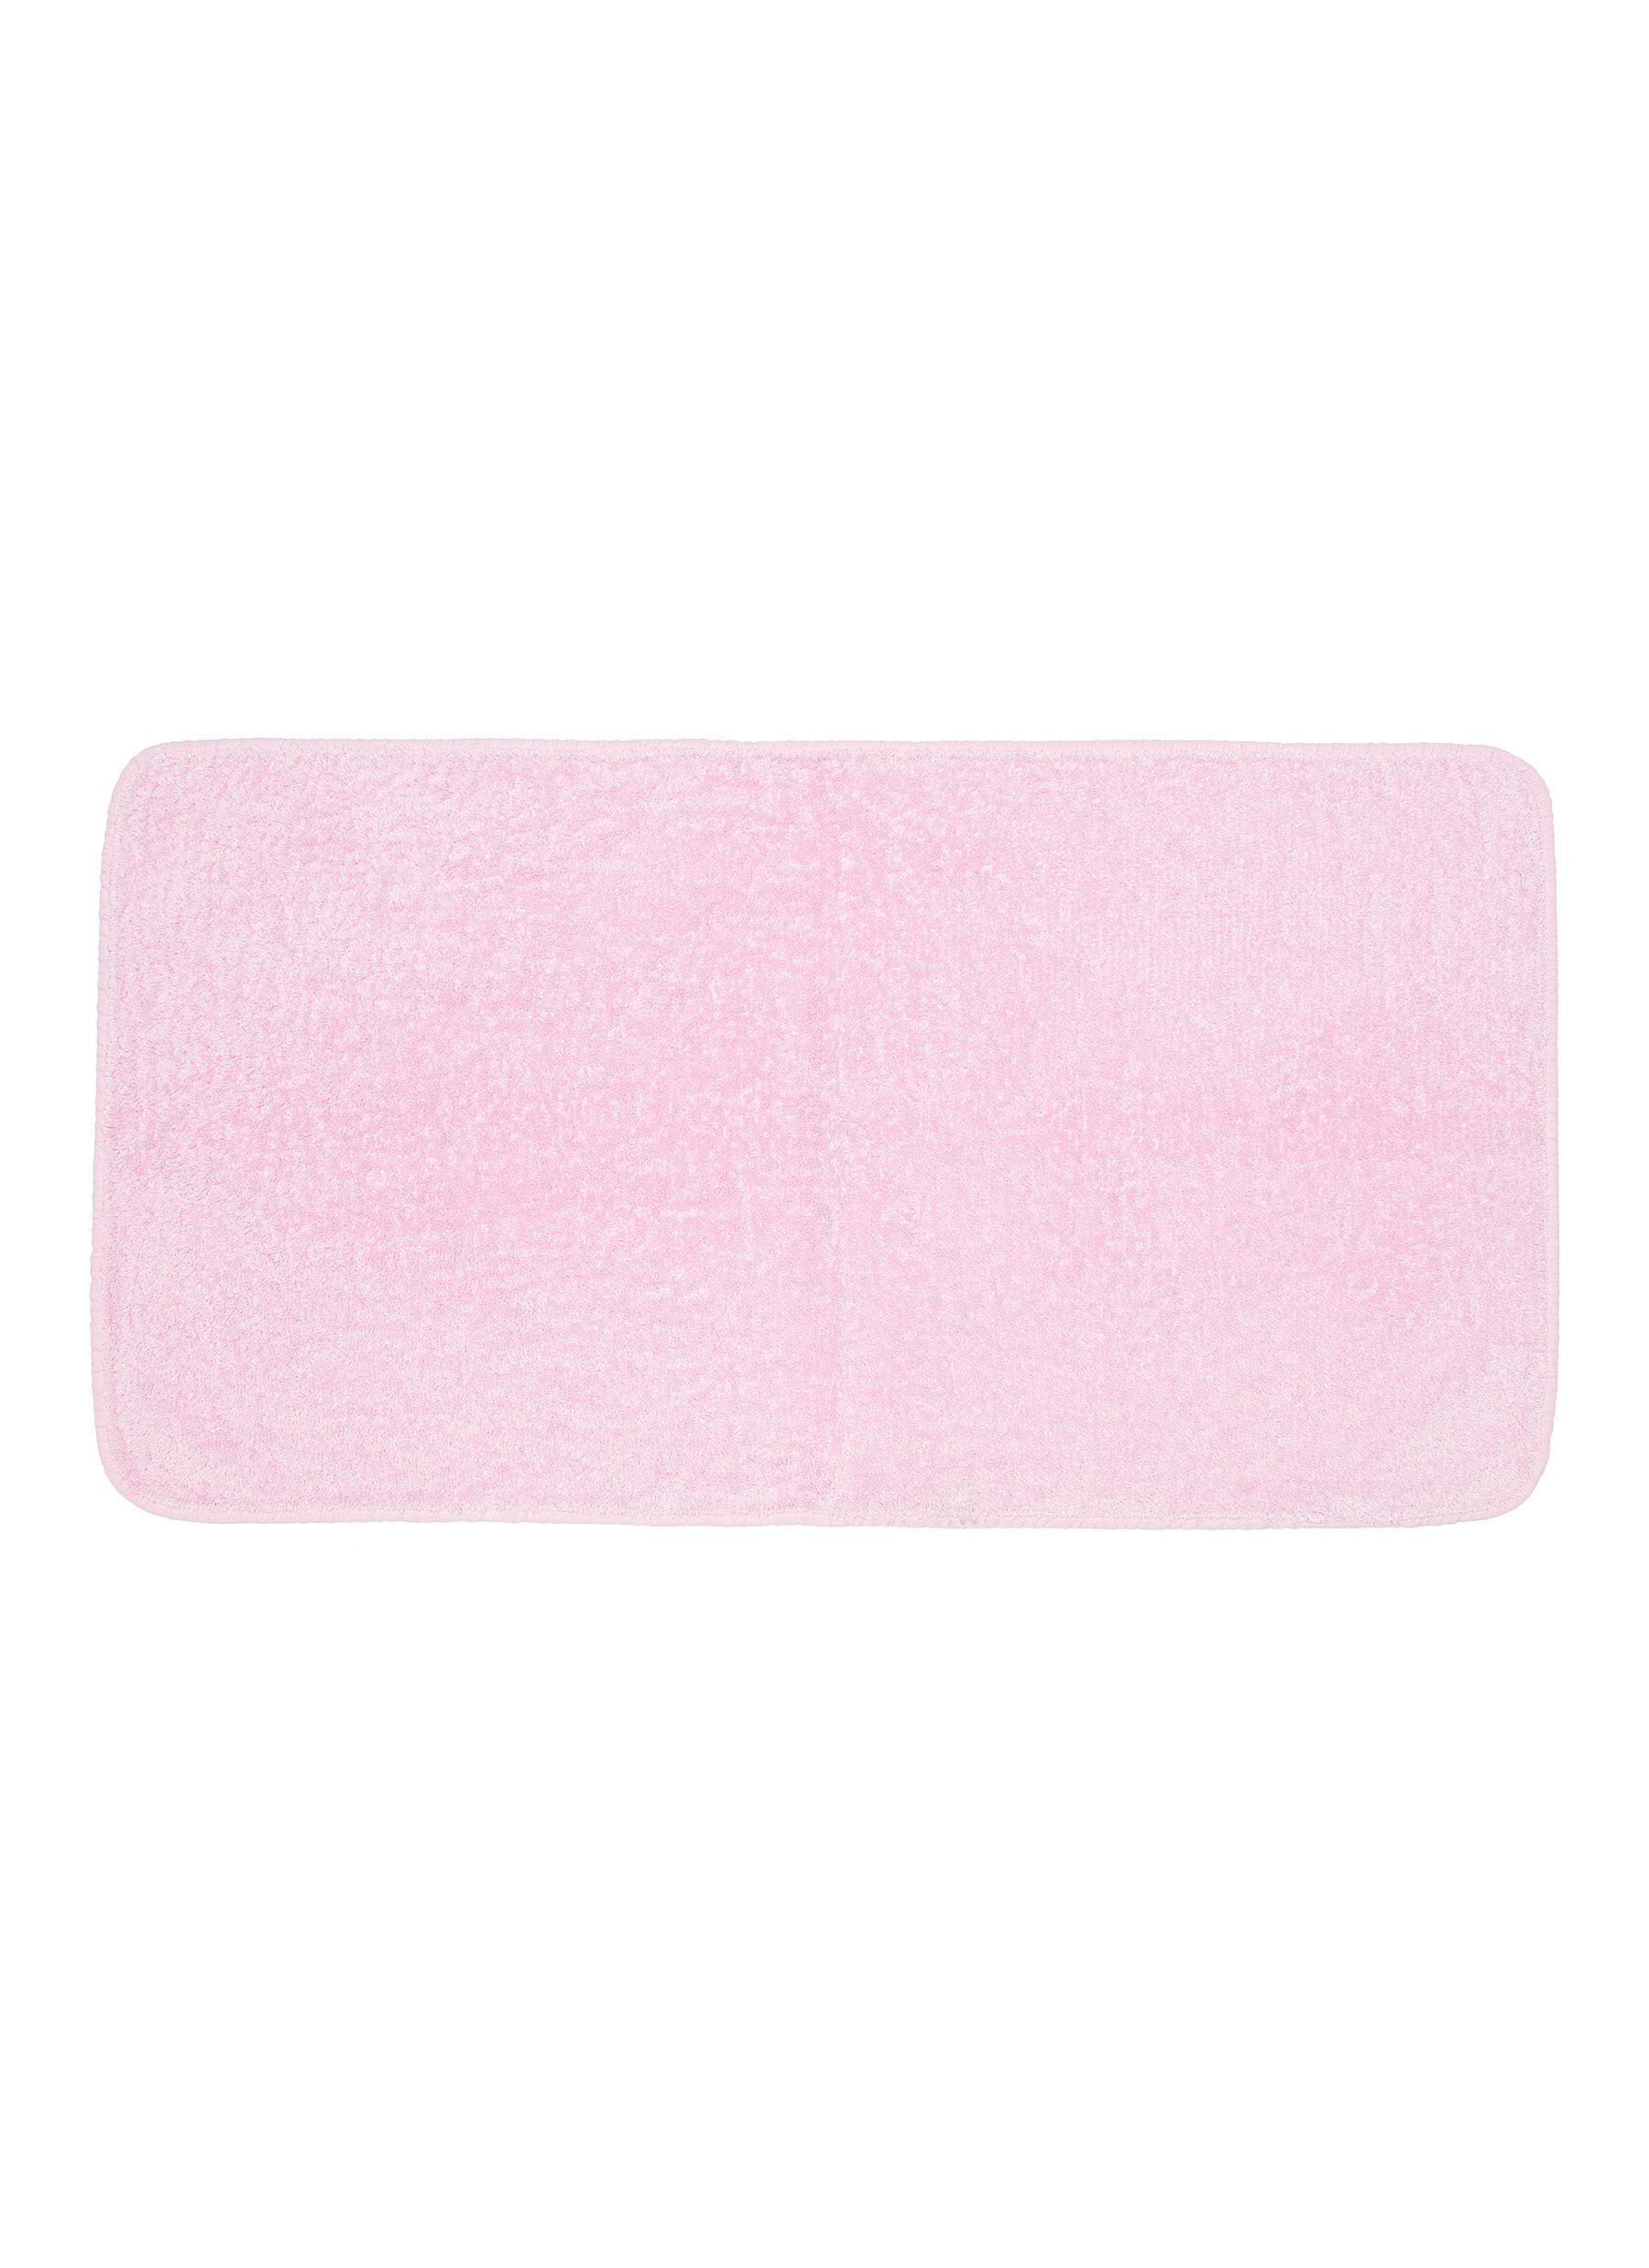 Abyss Super Pile Cotton Guest Towel - Pink Lady